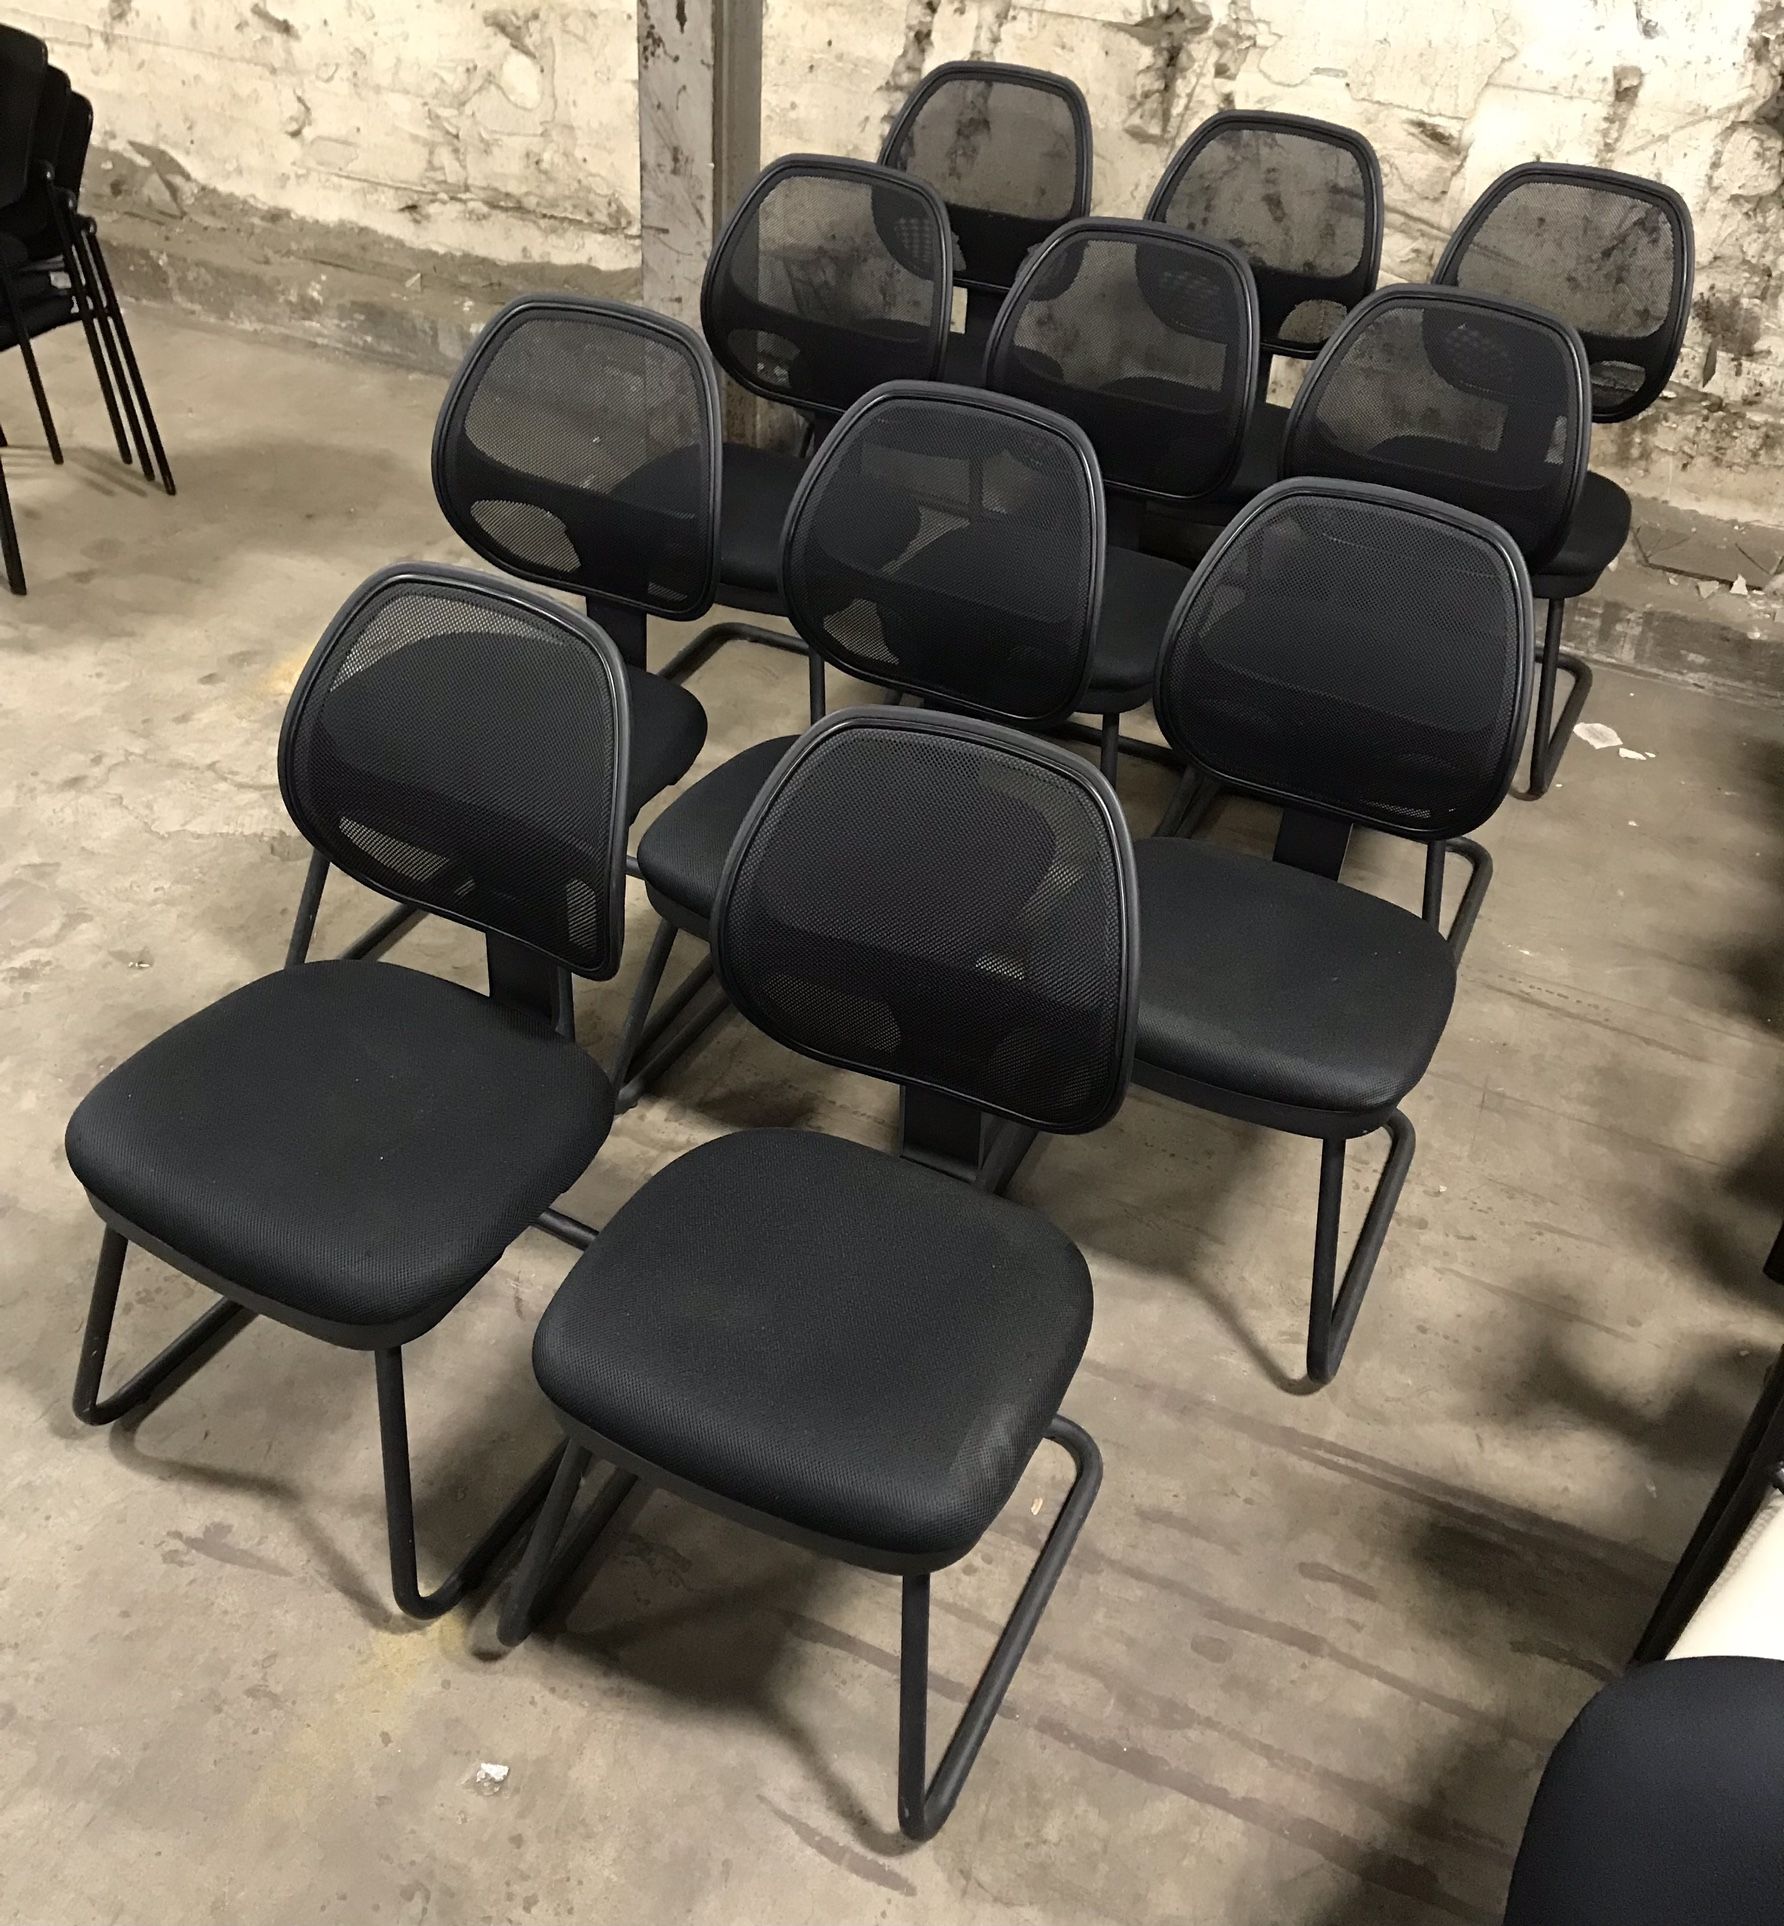 Office Chairs For Sale $50 For Each Chair - Excellent Condition (Tampa)